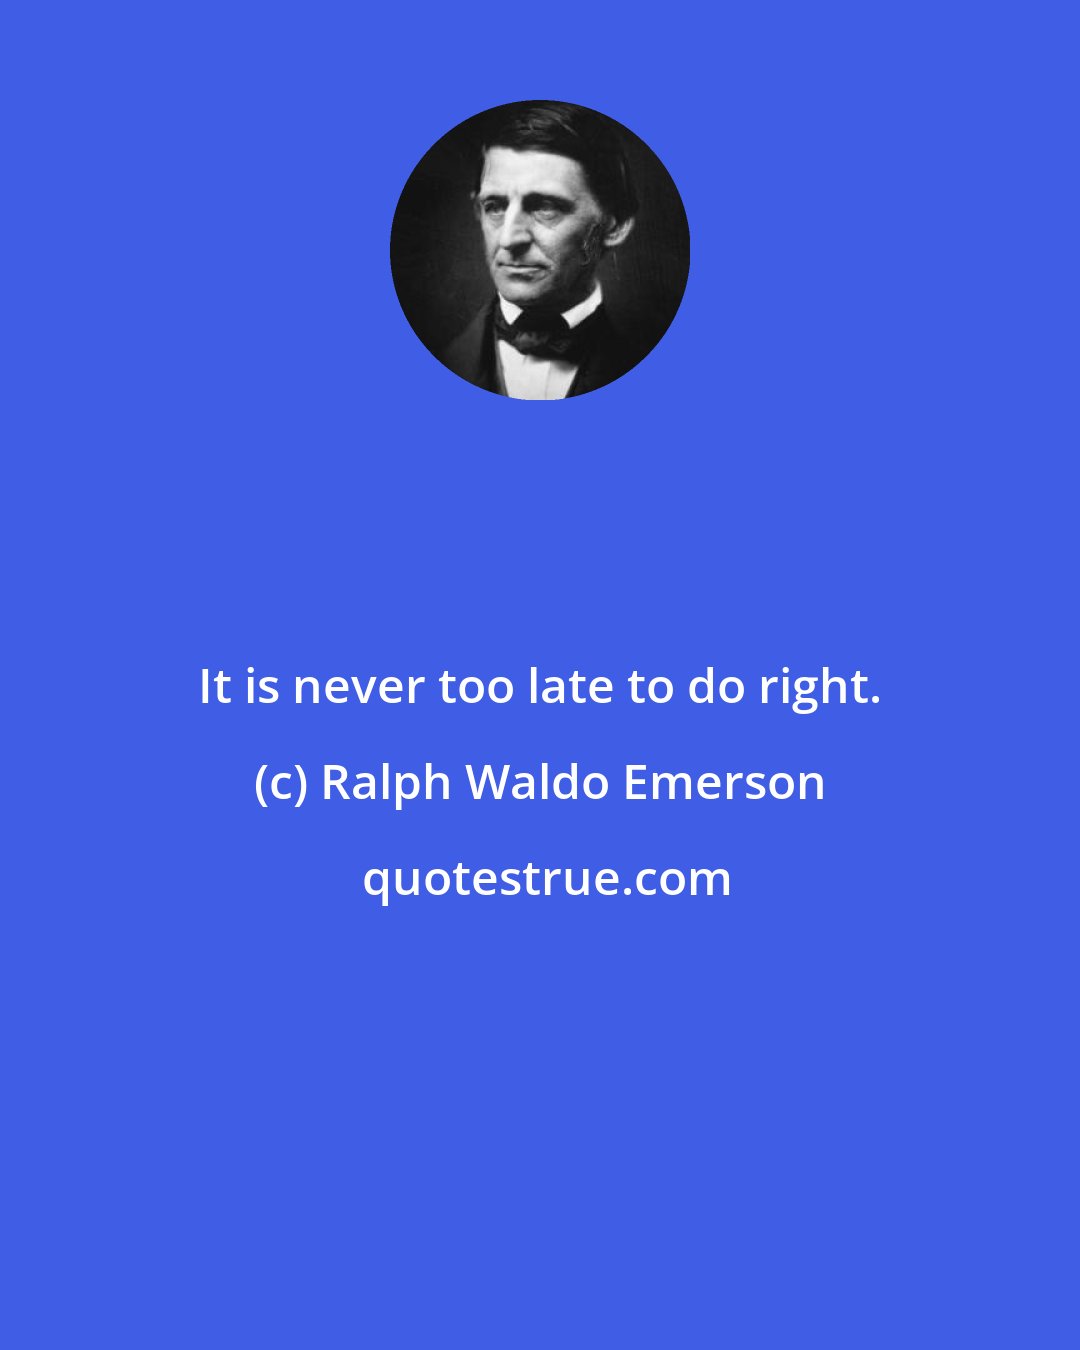 Ralph Waldo Emerson: It is never too late to do right.